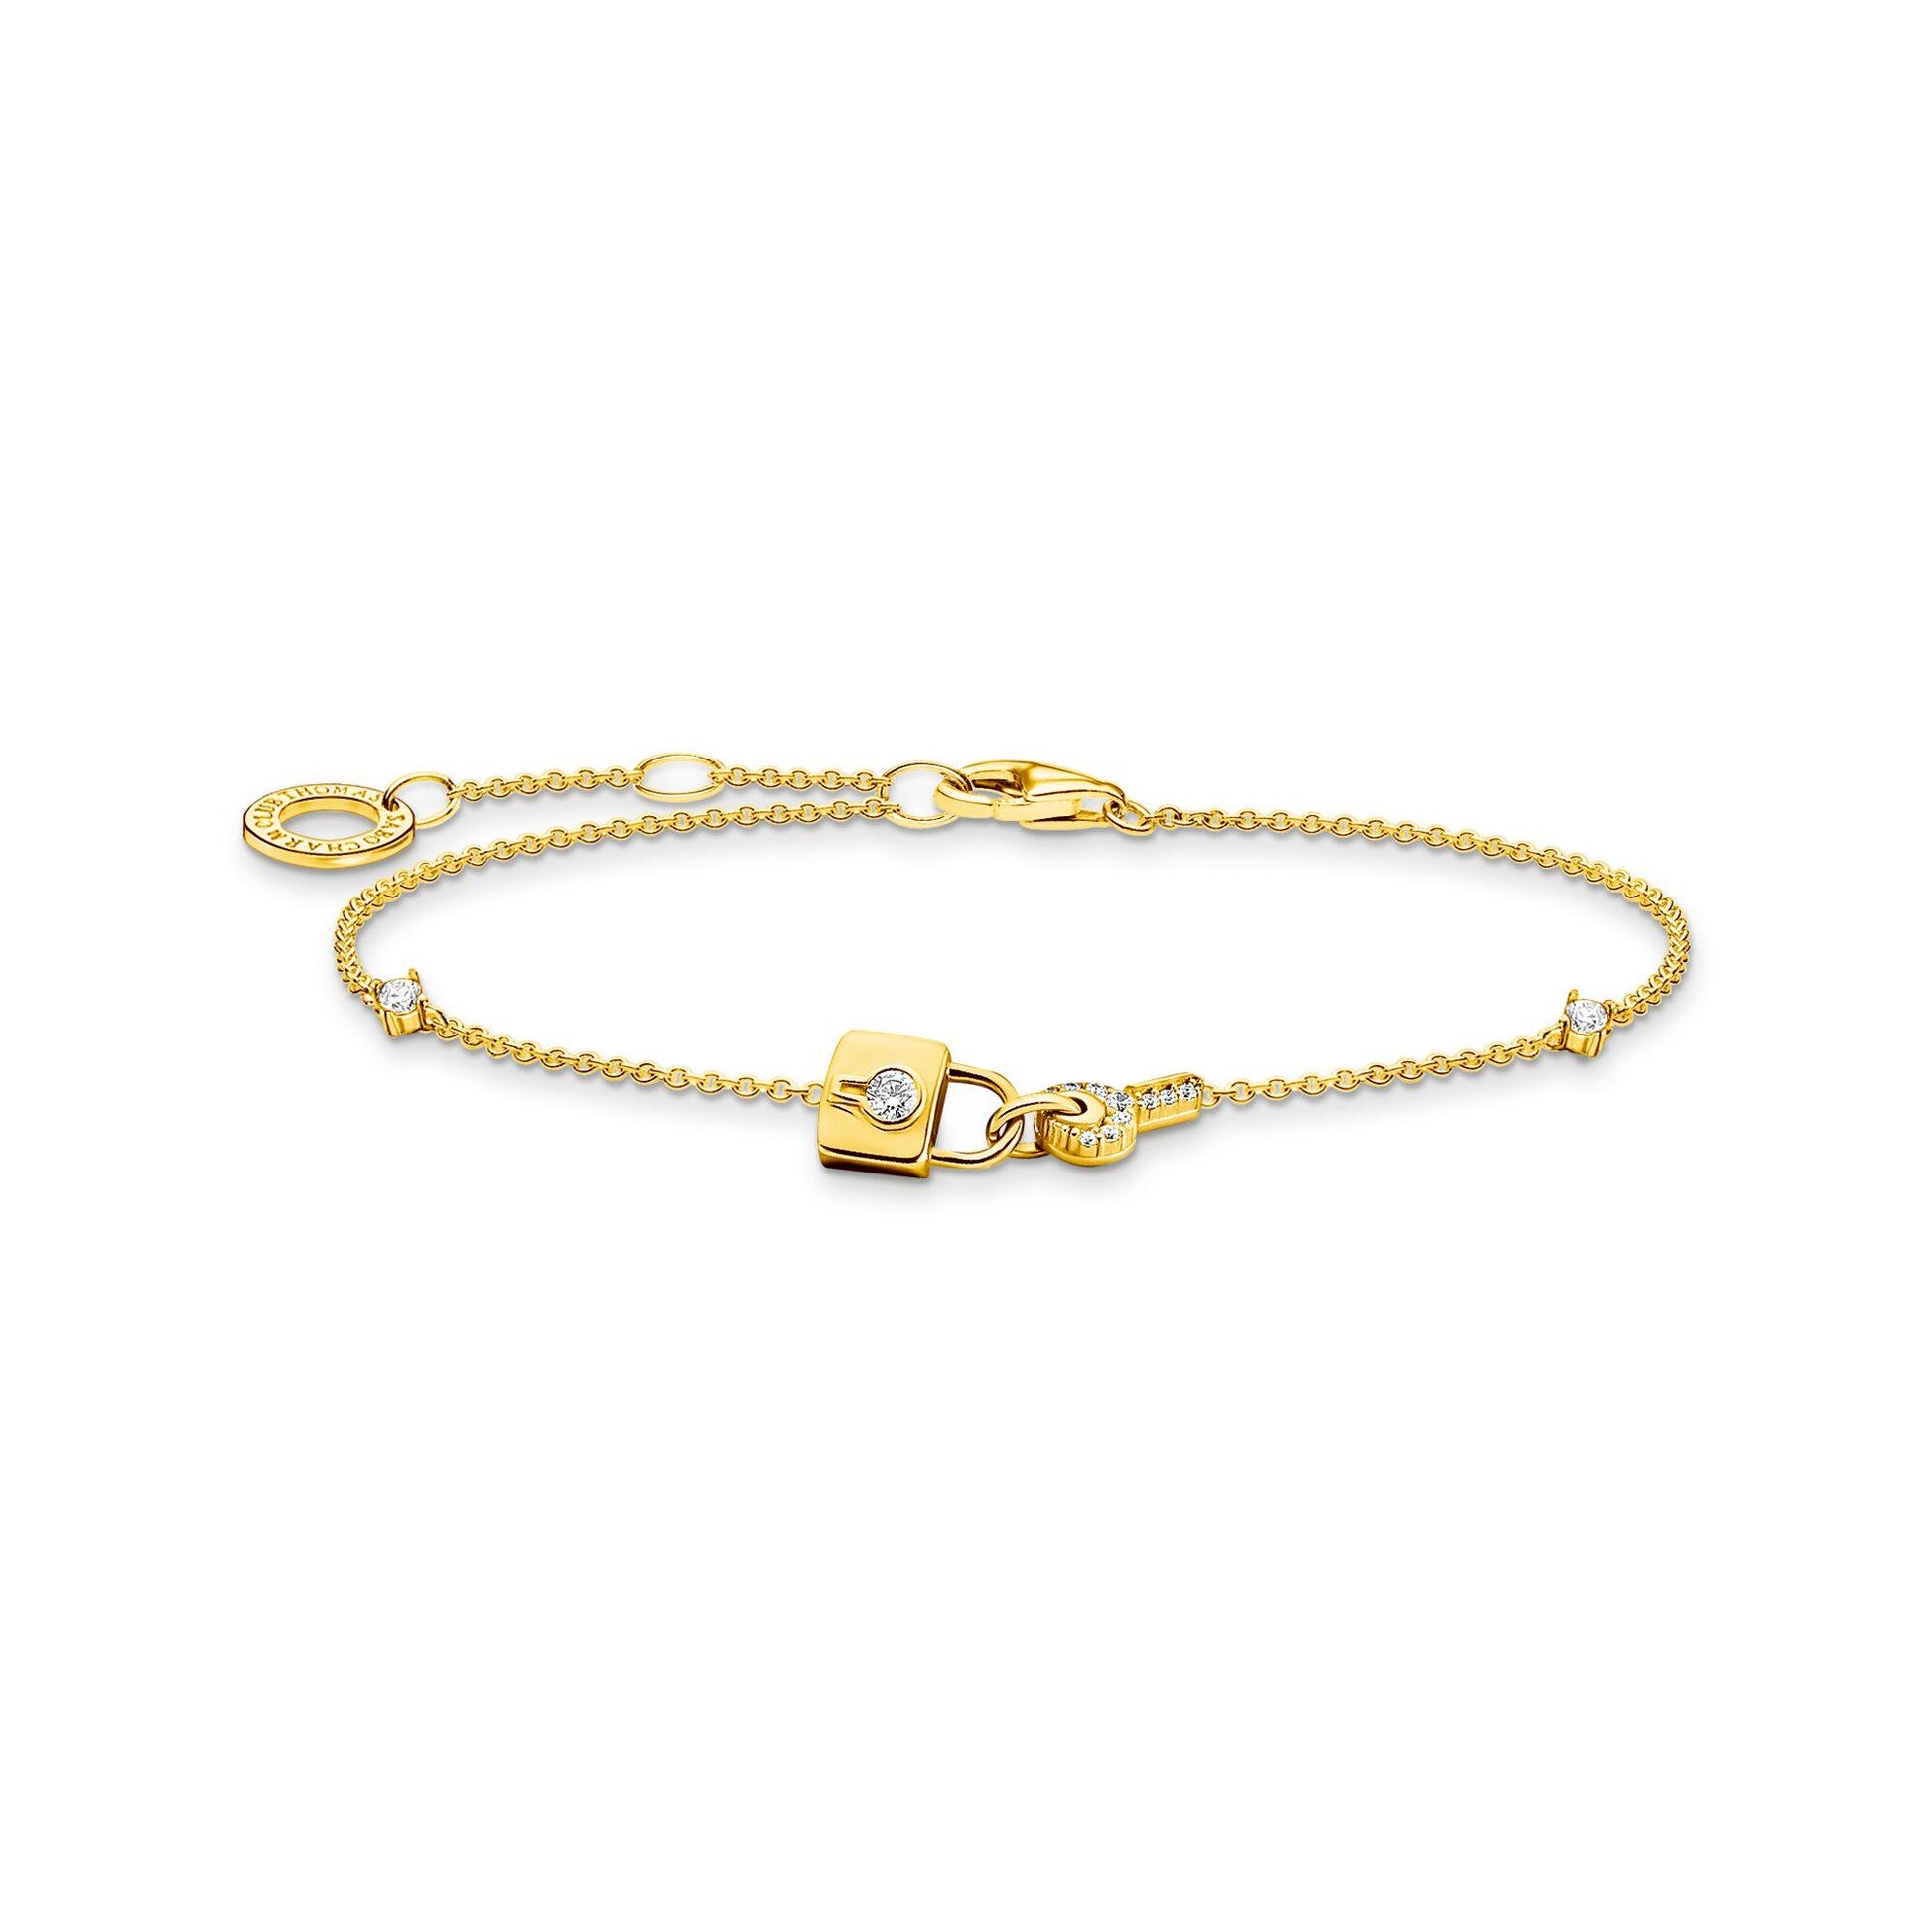 Thomas Sabo Yellow Gold Plated Bracelet with Cubic Zirconia Lock and Key A2040-414-14 - Judith Hart Jewellers